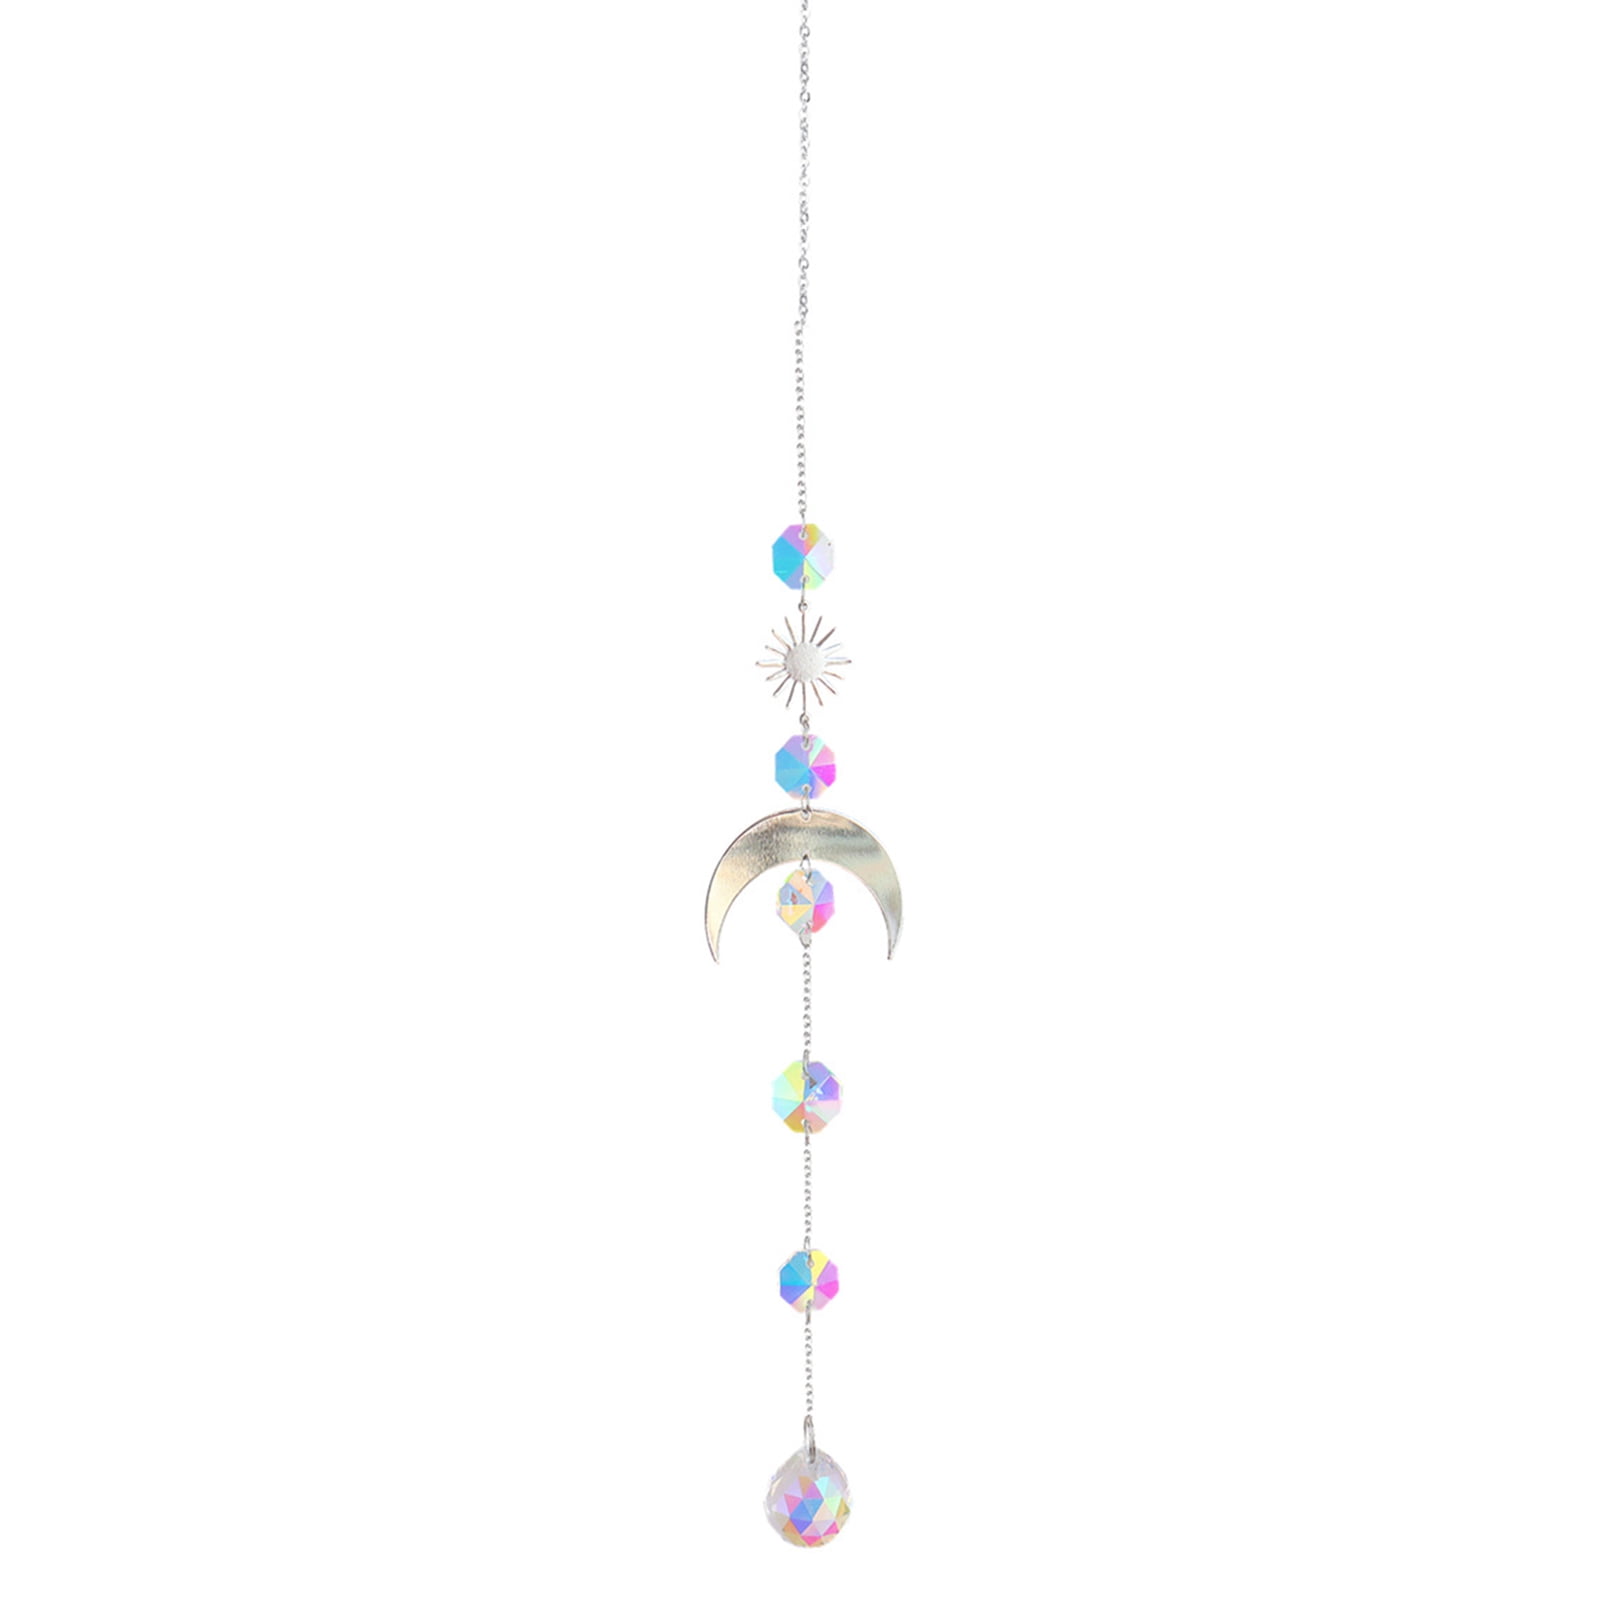 Yeezon Sun Catchers with Crystals Hanging Crystal Suncatcher for Window  Crystal Sun Catchers Indoor Window - Hanging Crystals for Decoration,  White